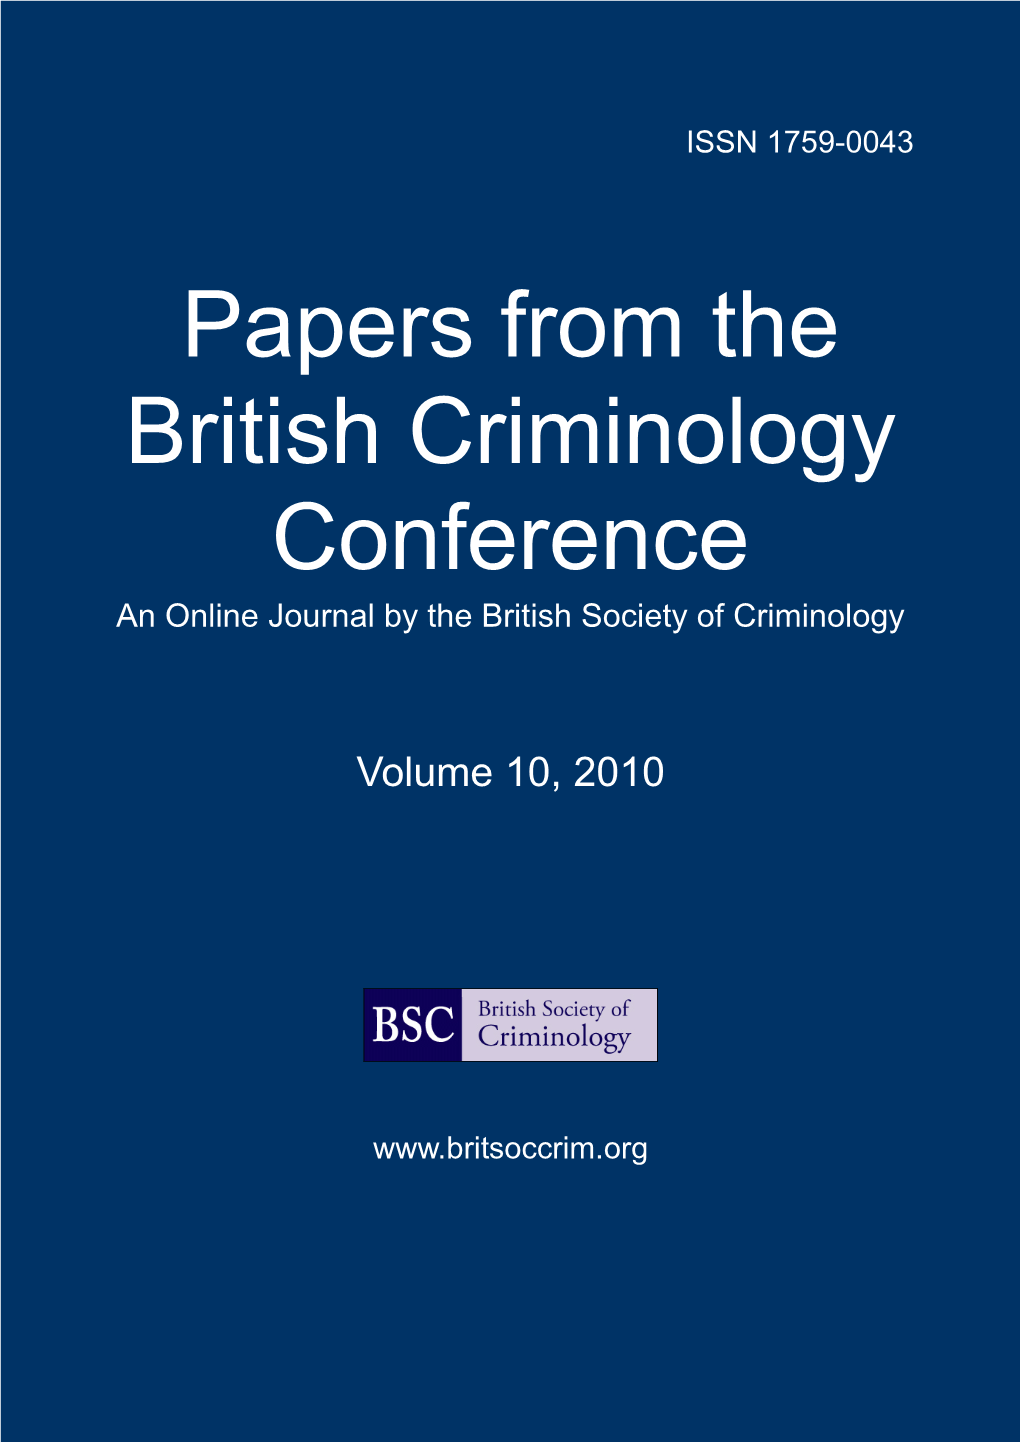 Papers from the British Criminology Conference, Vol. 10. 2010